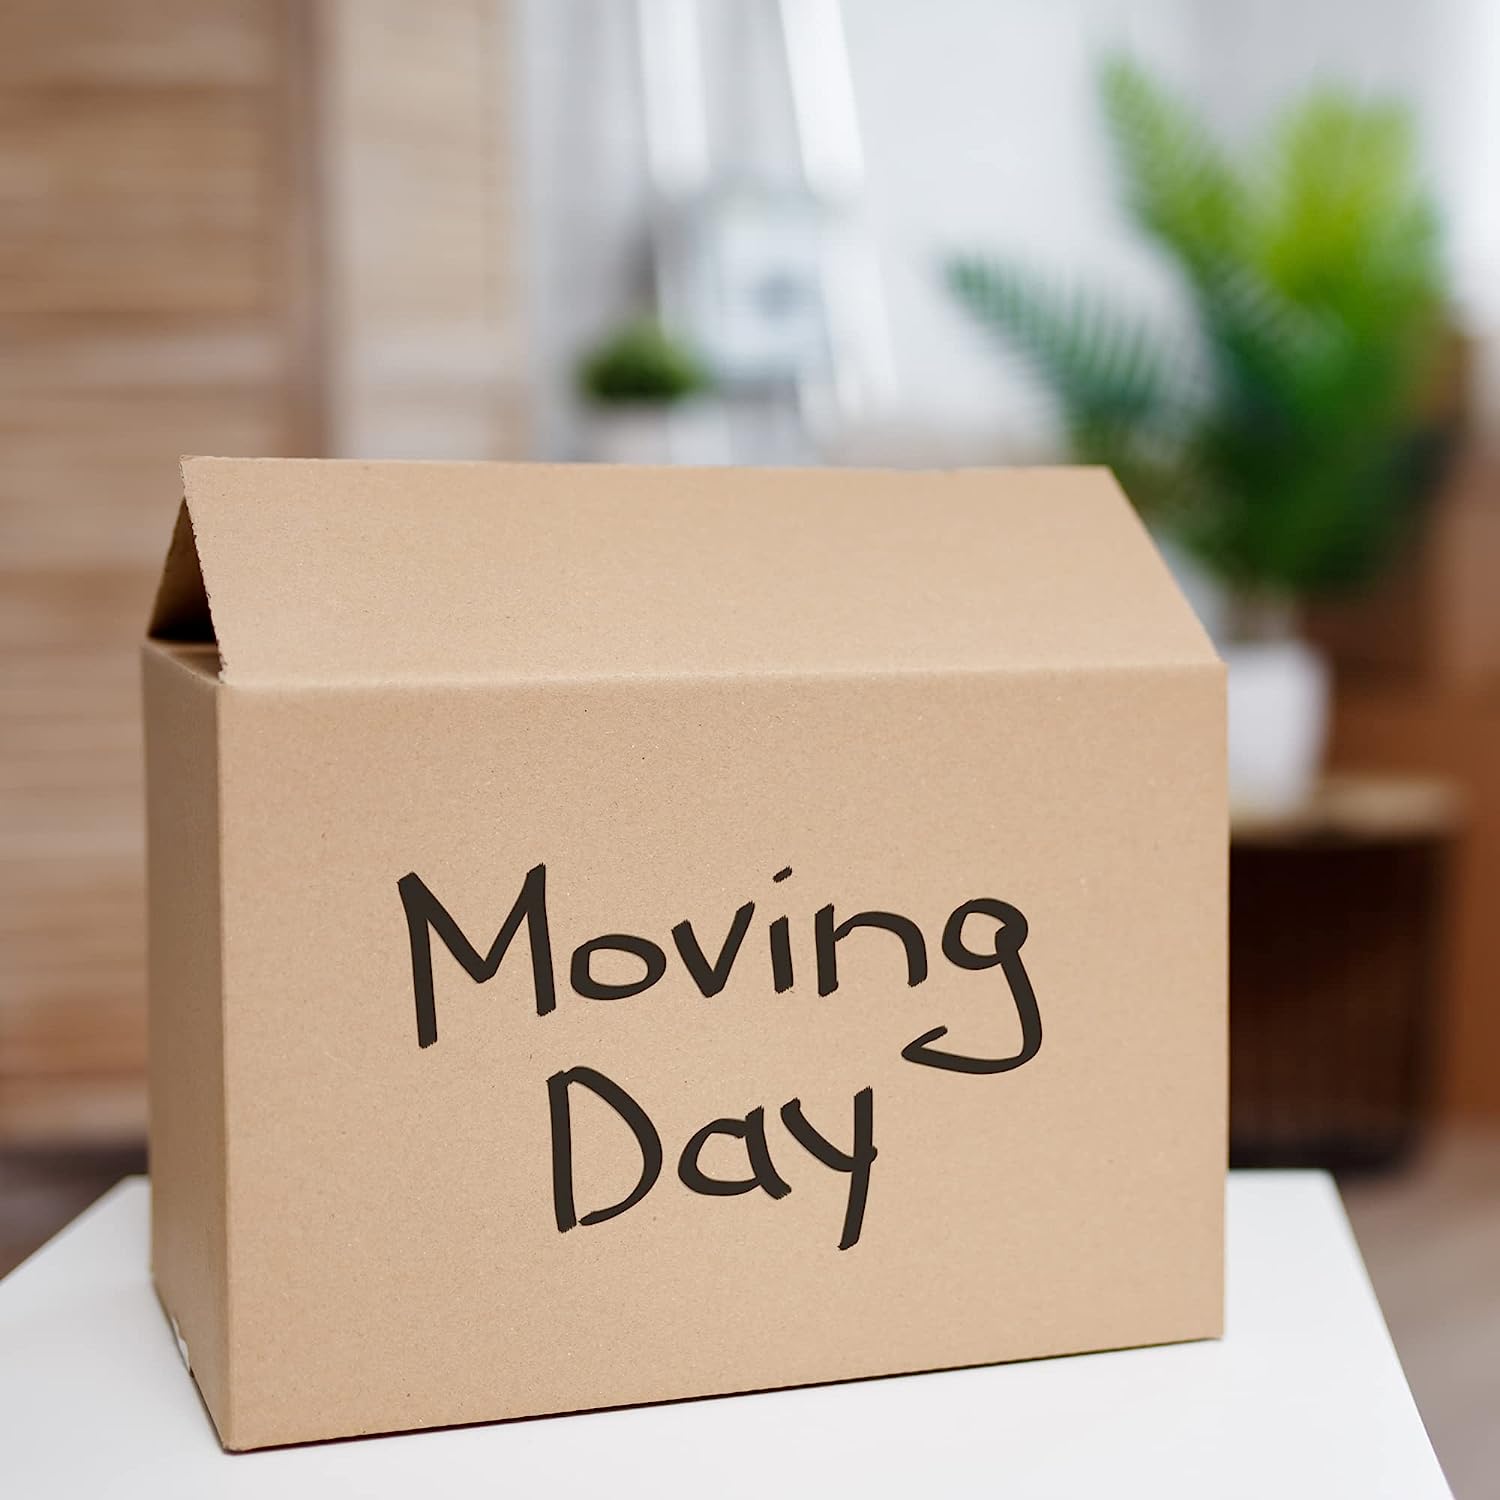 Where Can You Buy Boxes For Moving